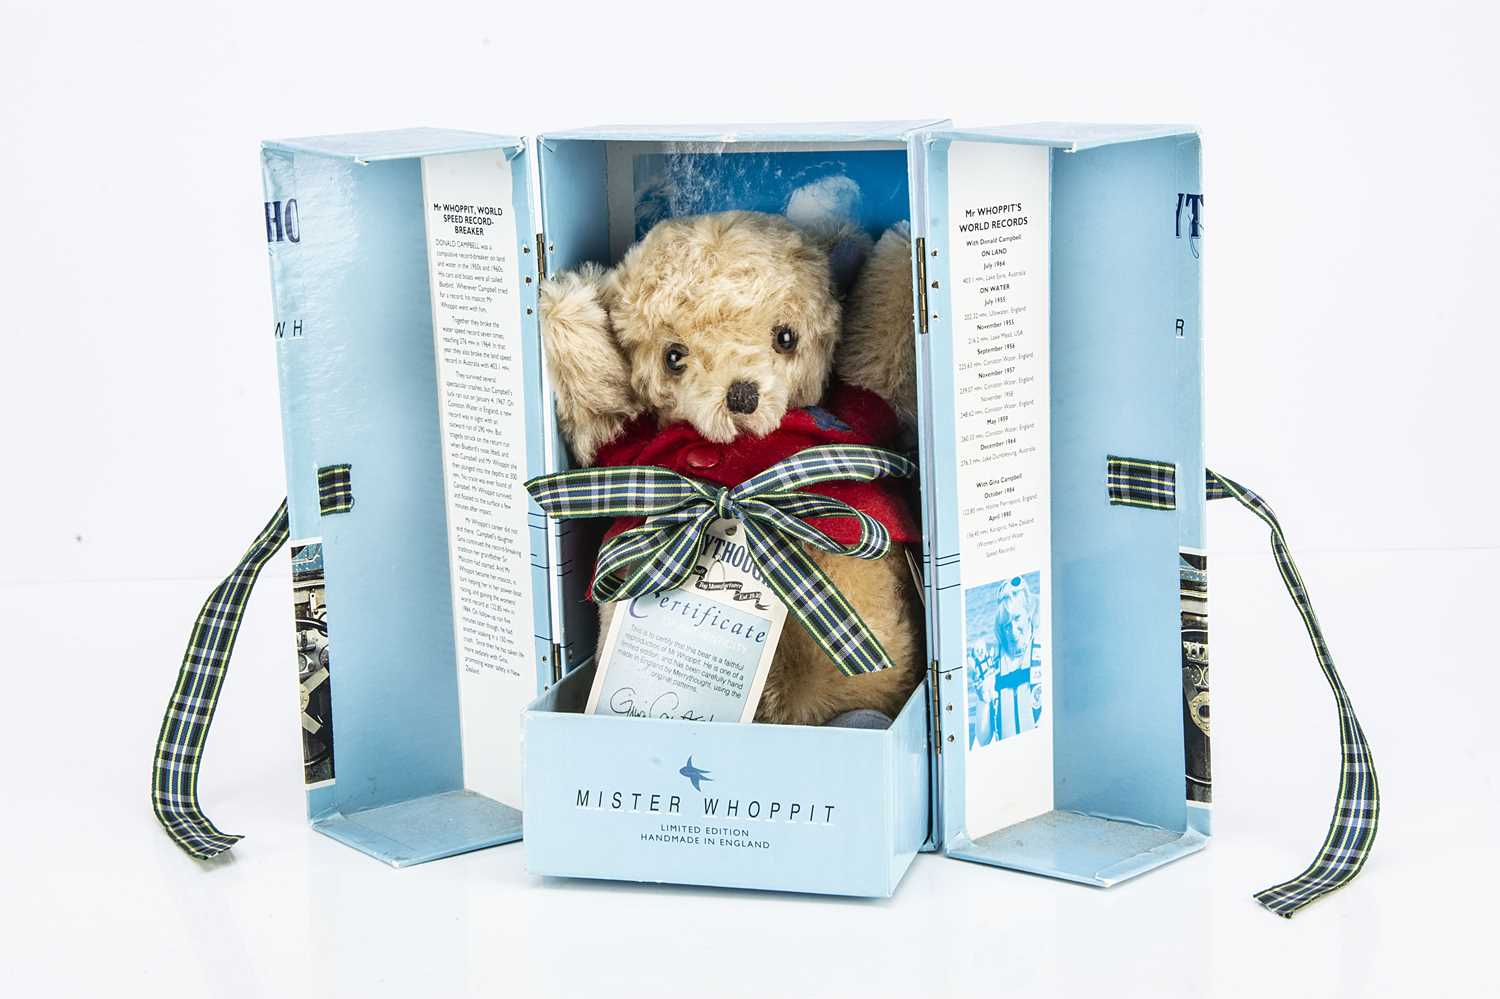 Lot 62 - A Merrythought limited edition Mister Whoppit Teddy Bear